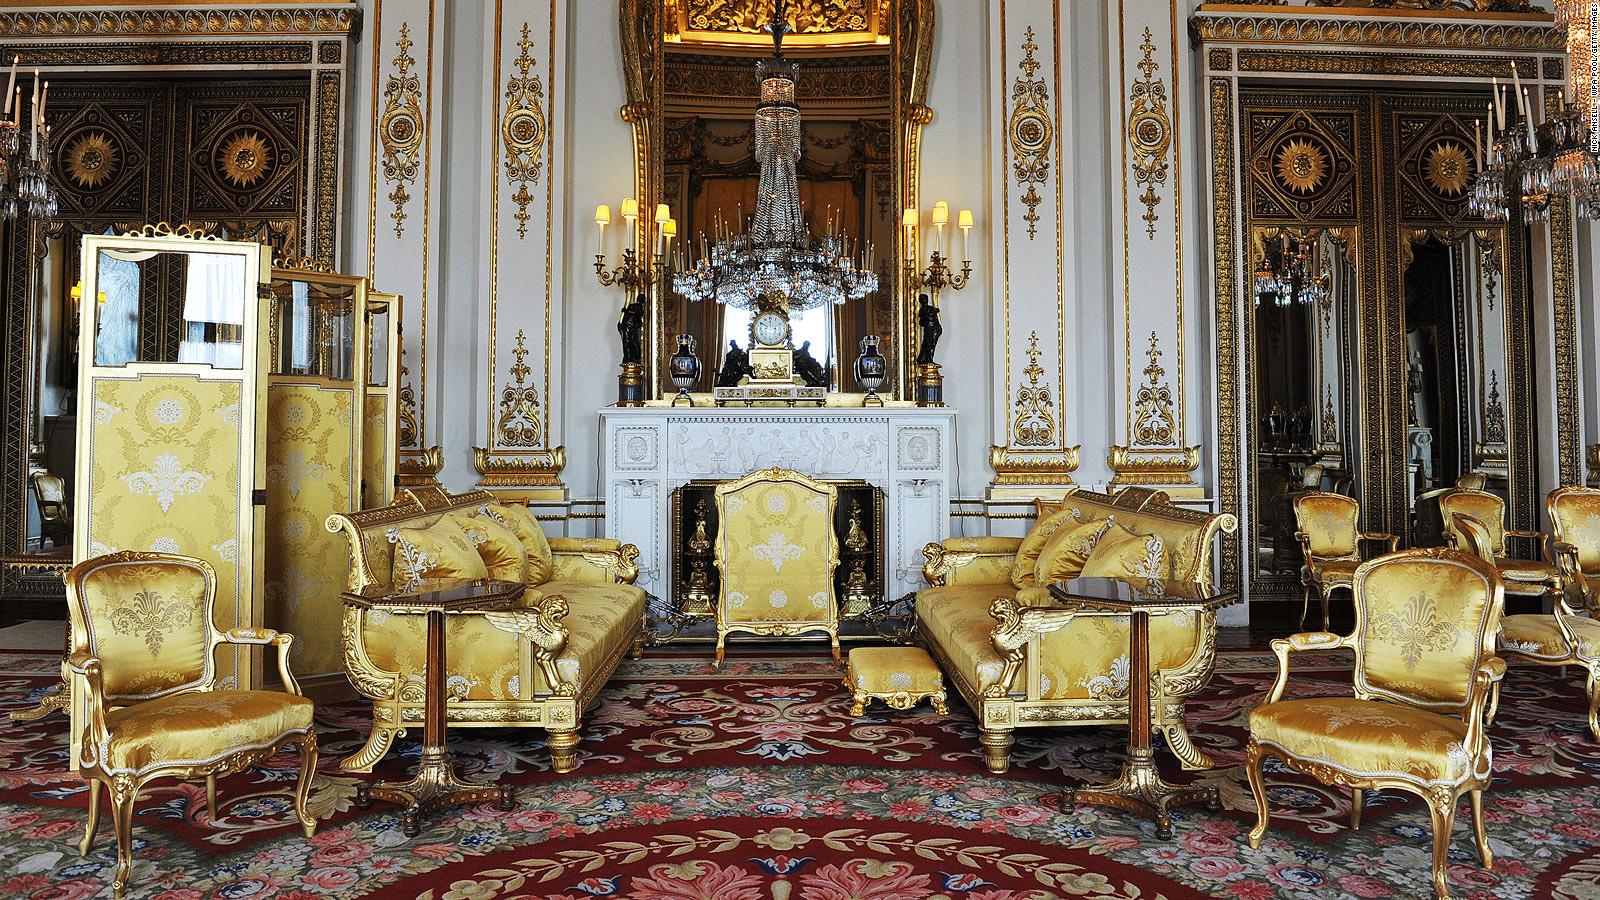 Buckingham Palace Tour 15 Amazing Things To See And Do